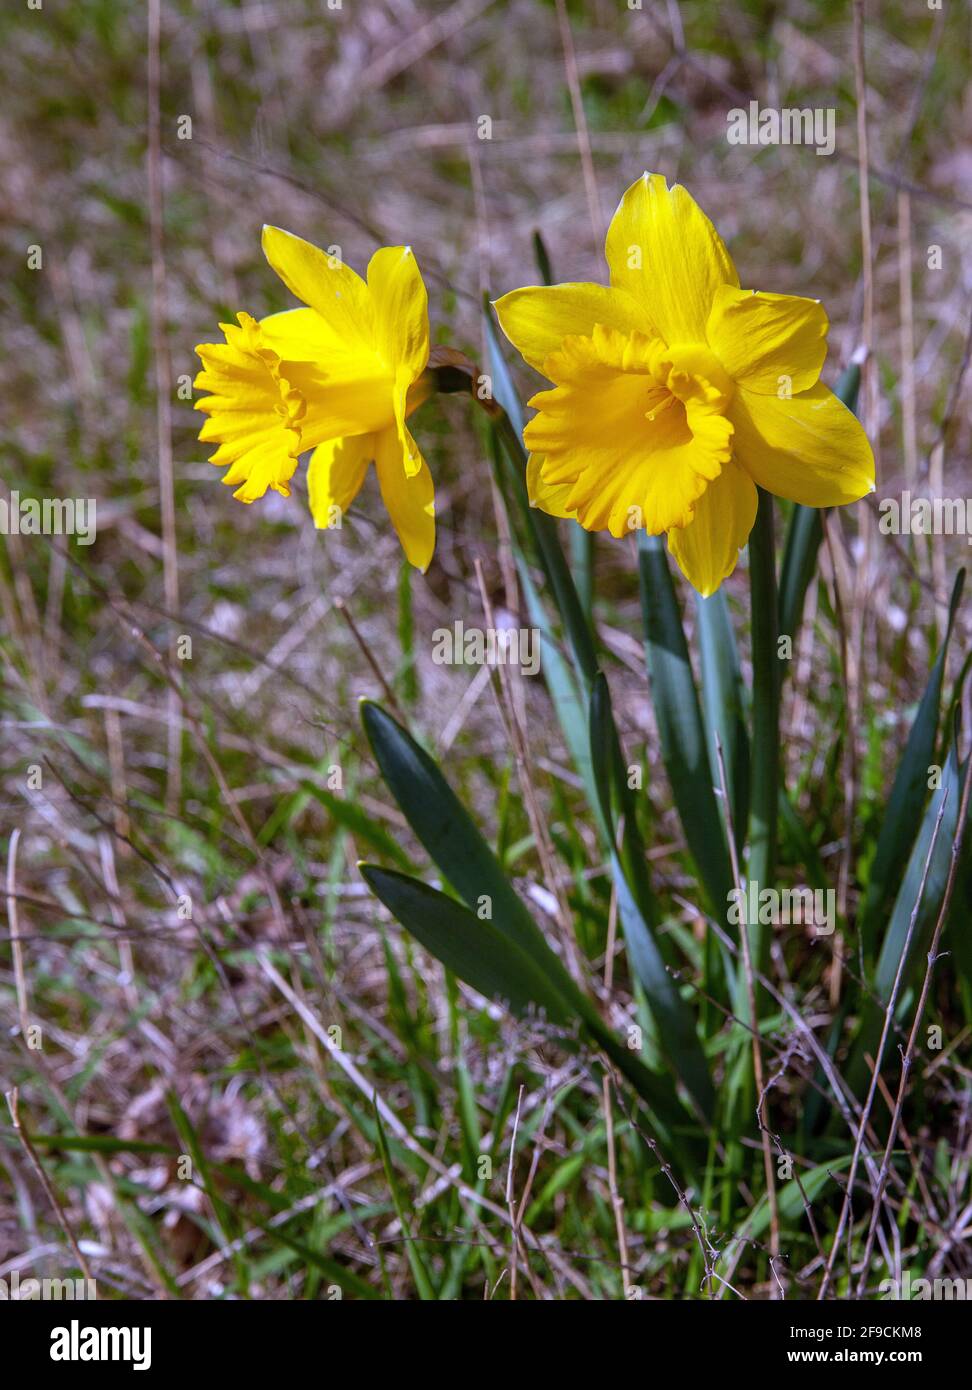 Narcissus Carlton. Daffodil, in woodland Sweden Stock Photo